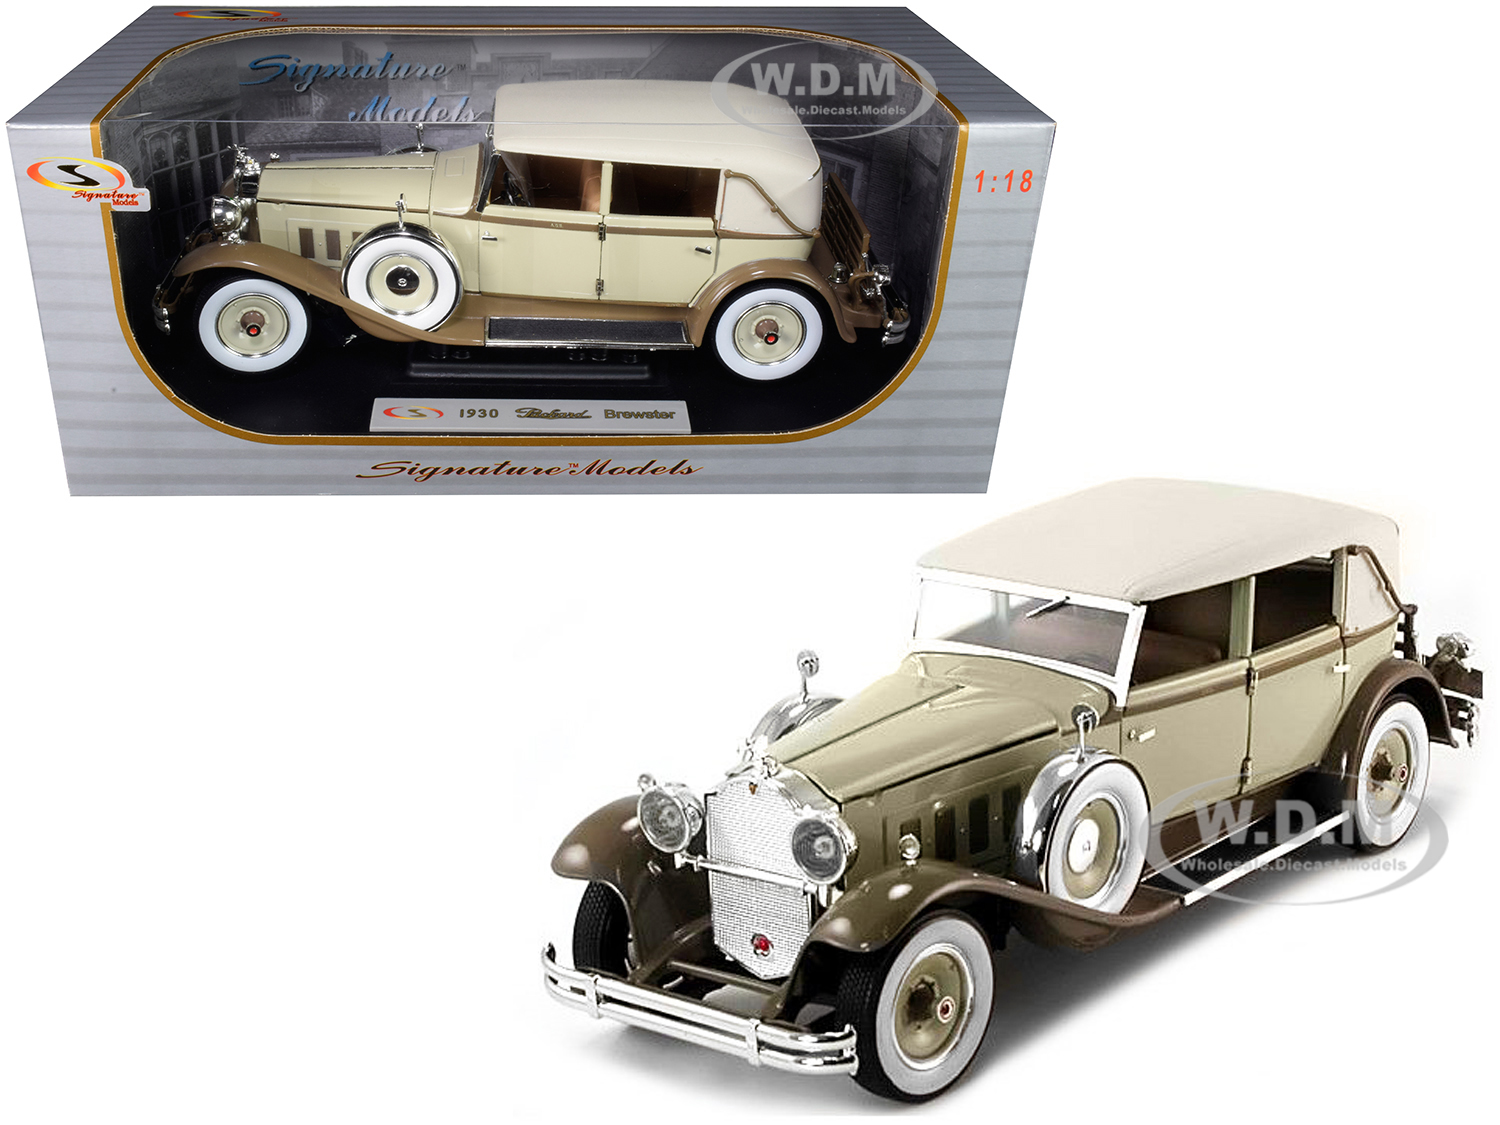 1930 Packard Brewster Tan and Coffee Brown 1/18 Diecast Model Car by Signature Models